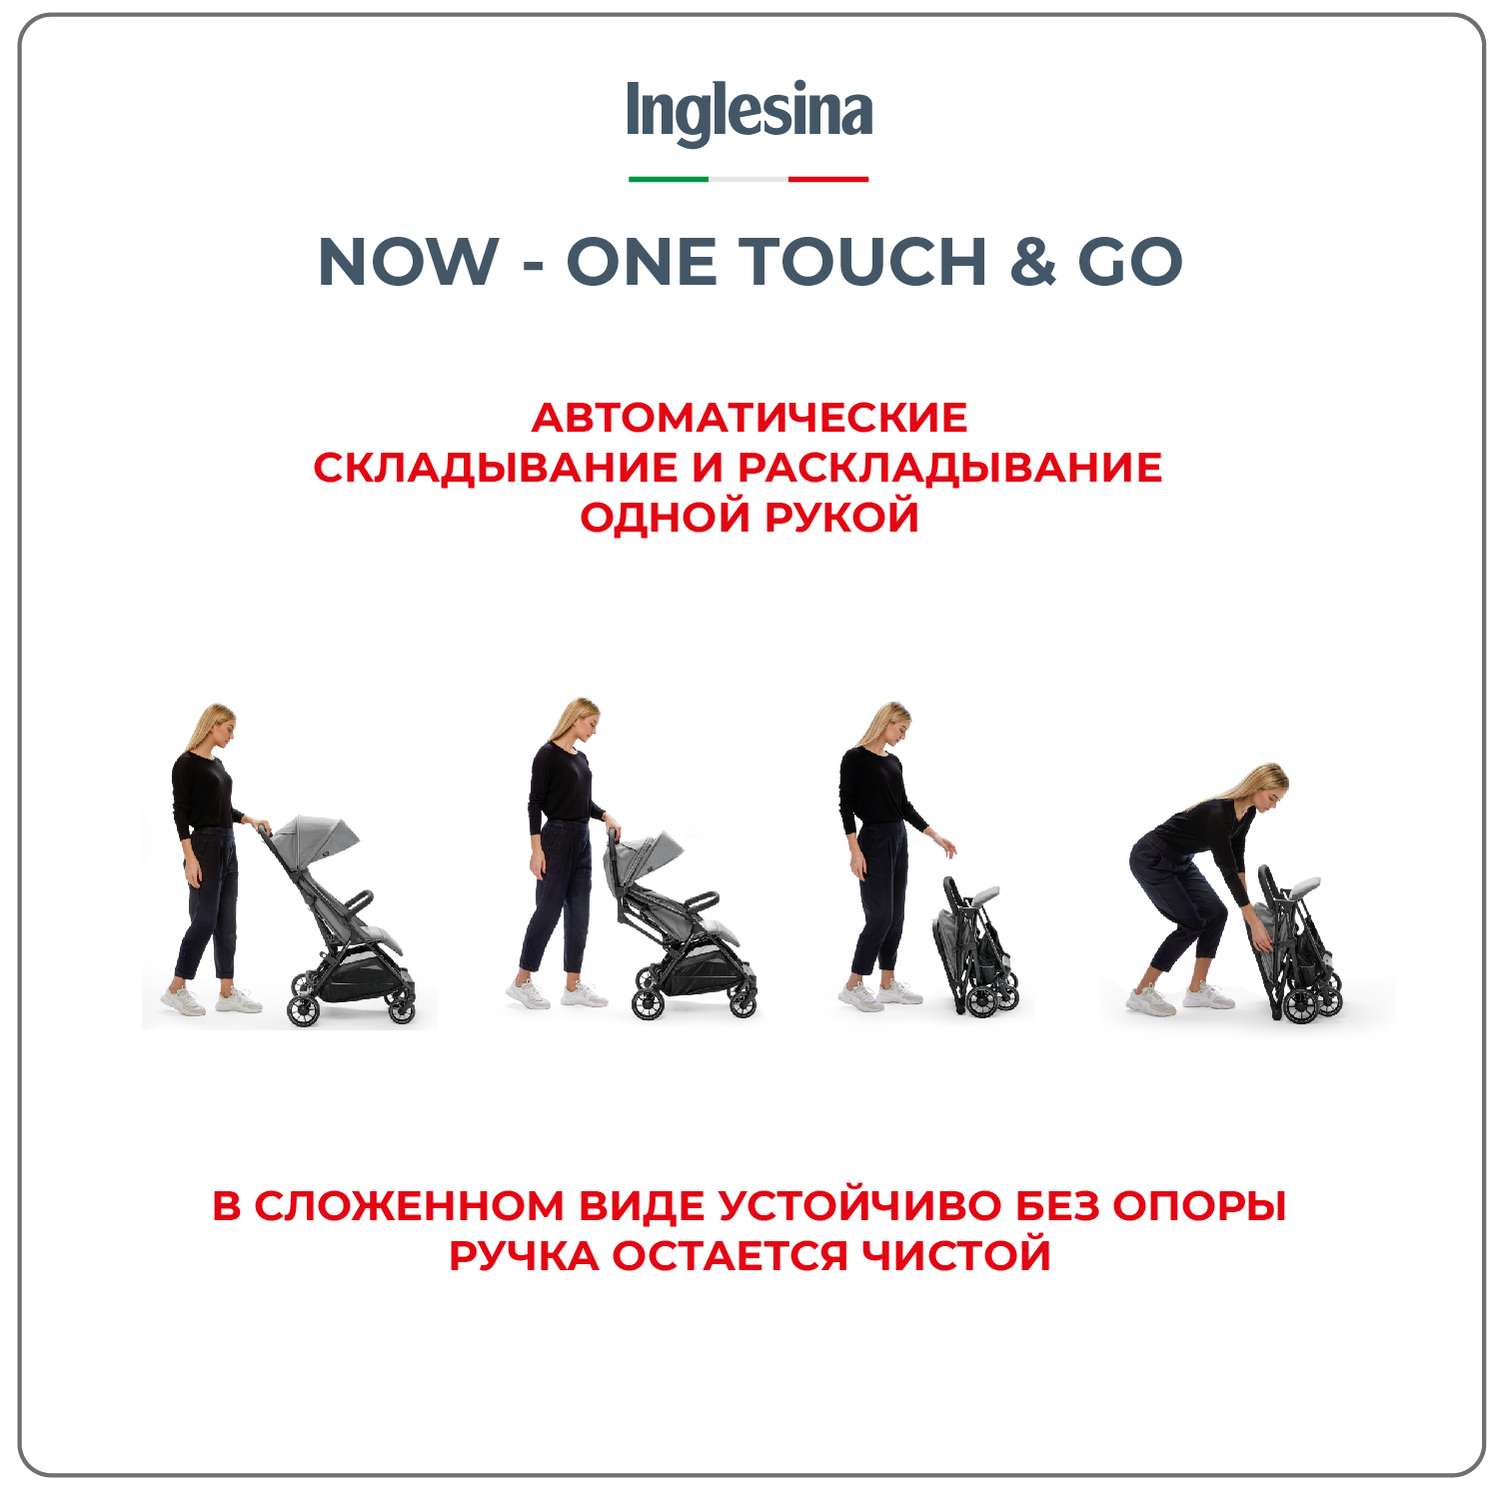 Прогулочная коляска INGLESINA Now Shot beige One touch and go - фото 4